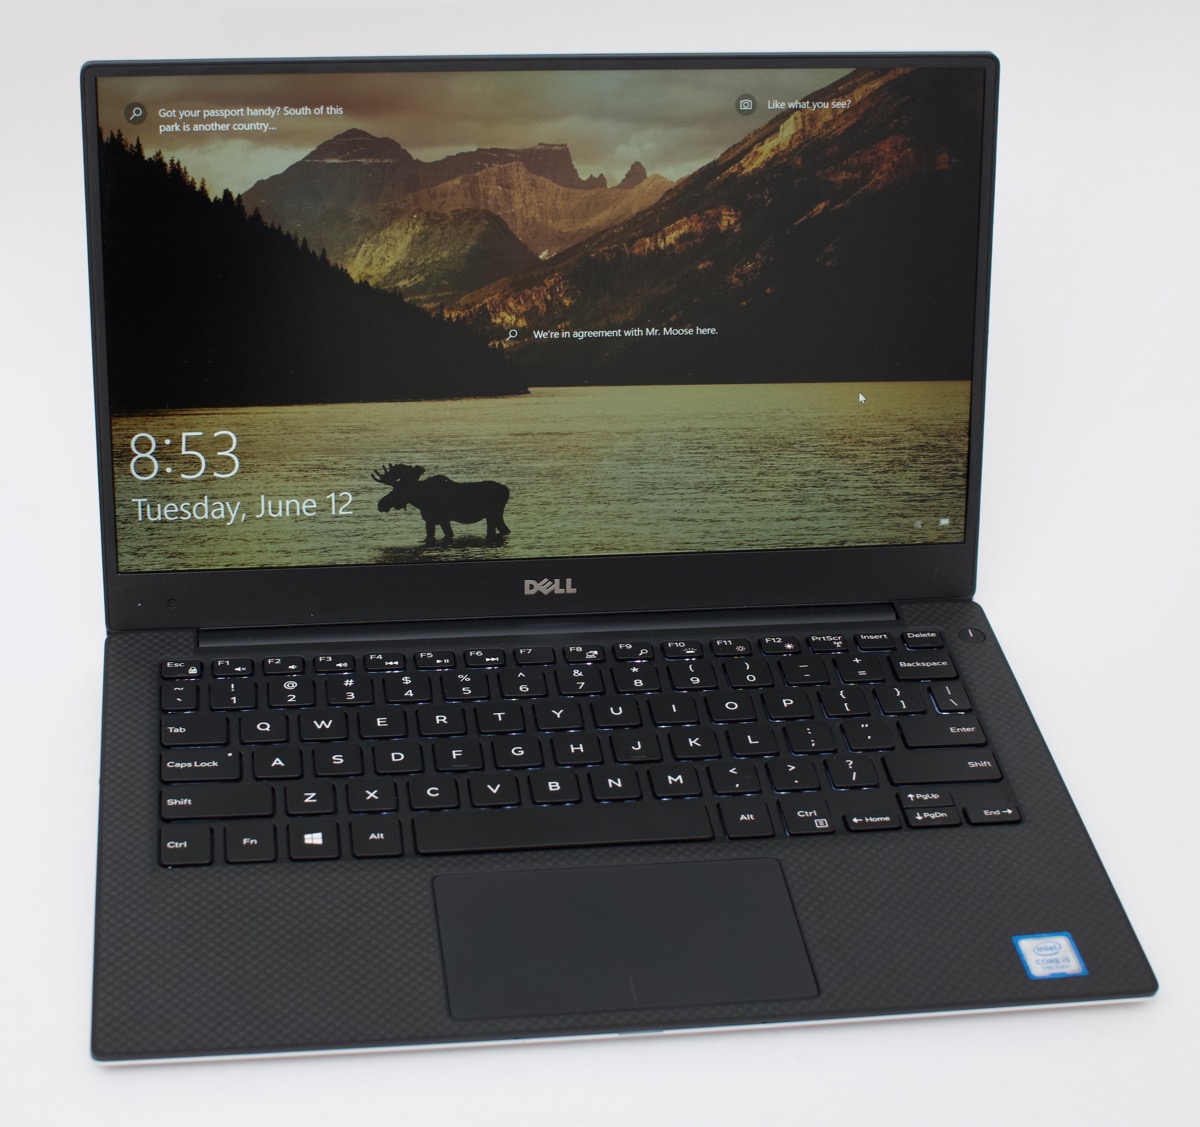 Dell Xps 13 9360 Review From A Lifelong Mac User Jeff Geerling